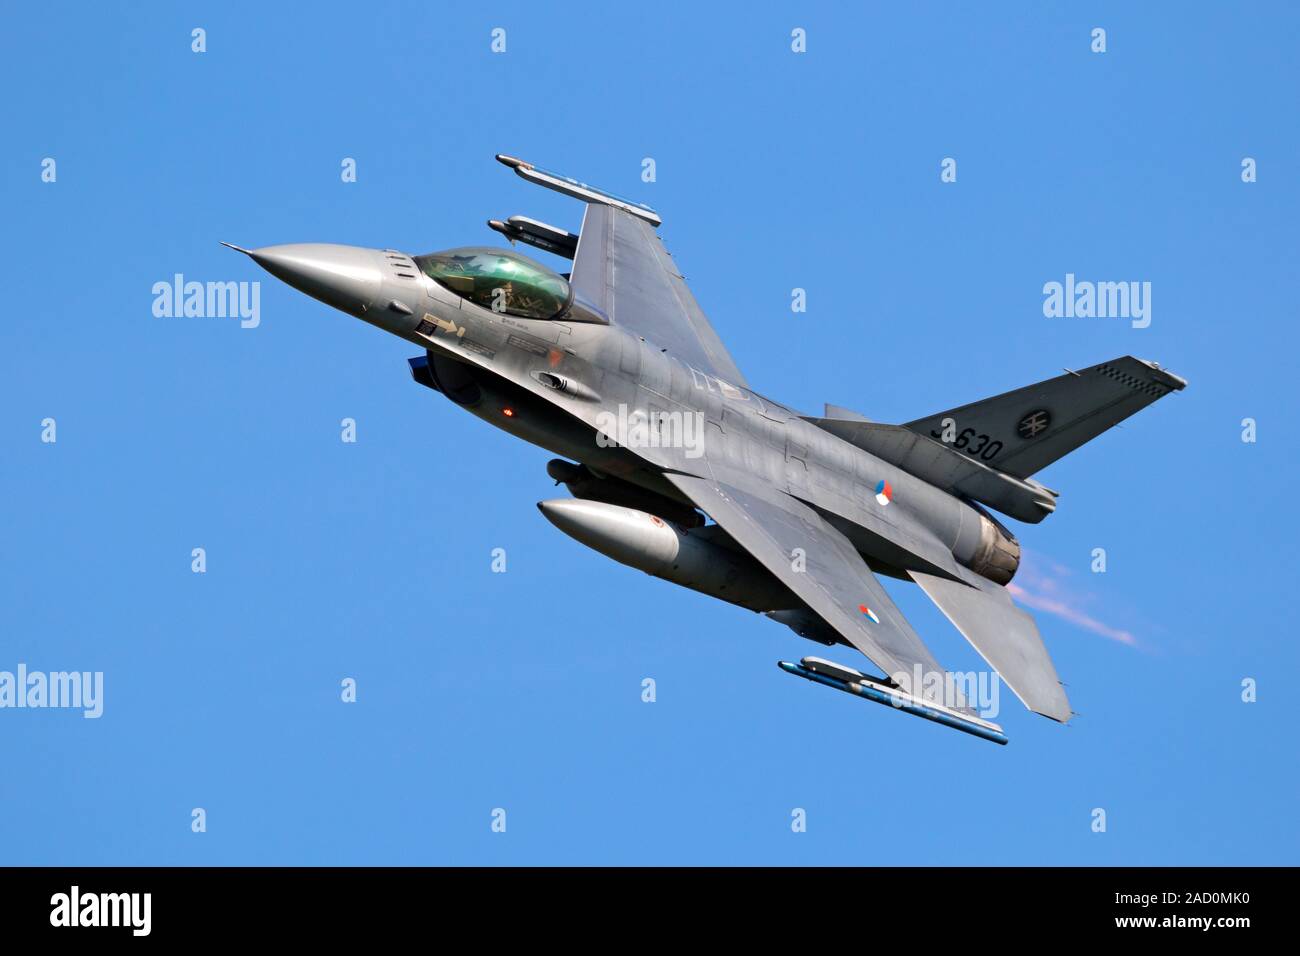 LEEUWARDEN, THE NETHERLANDS - APRIL 19, 2018: Royal Netherlands Air Force F16 fighter jet aircraft taking off during NATO exercise Frisian Flag. Stock Photo